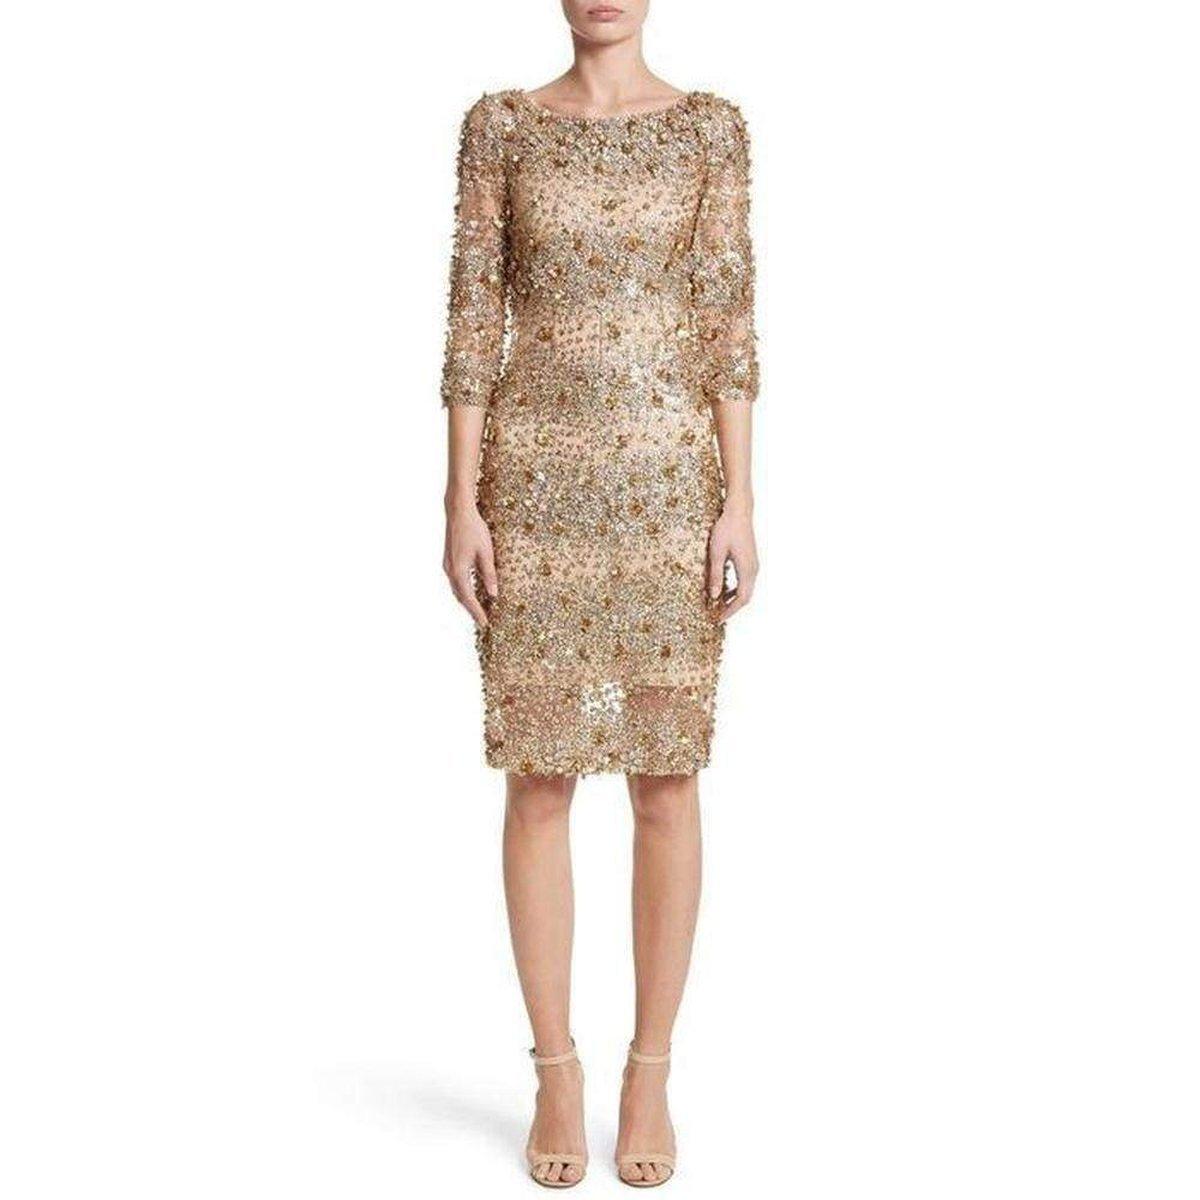 Naeem Khan cocktail dress with allover mixed beading.
Bateau neckline.
Three-quarter sleeves.
Fitted silhouette.
Hidden back zip.
Nylon; lining, silk.
Made in USA of imported material.